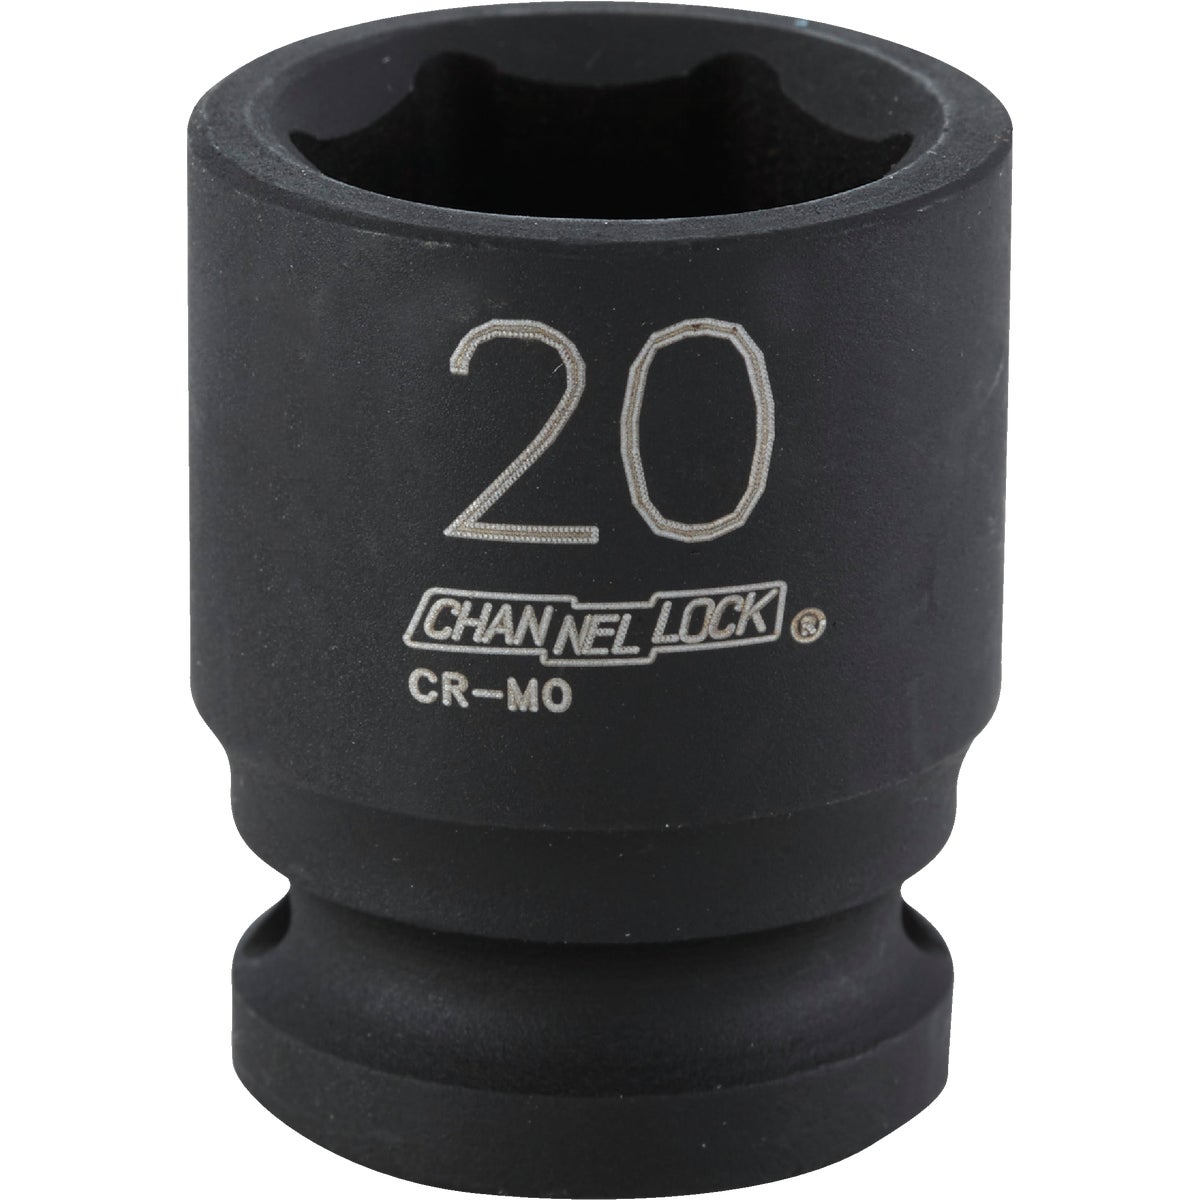 Channellock 1/2 In. Drive 20 mm 6-Point Shallow Metric Impact Socket